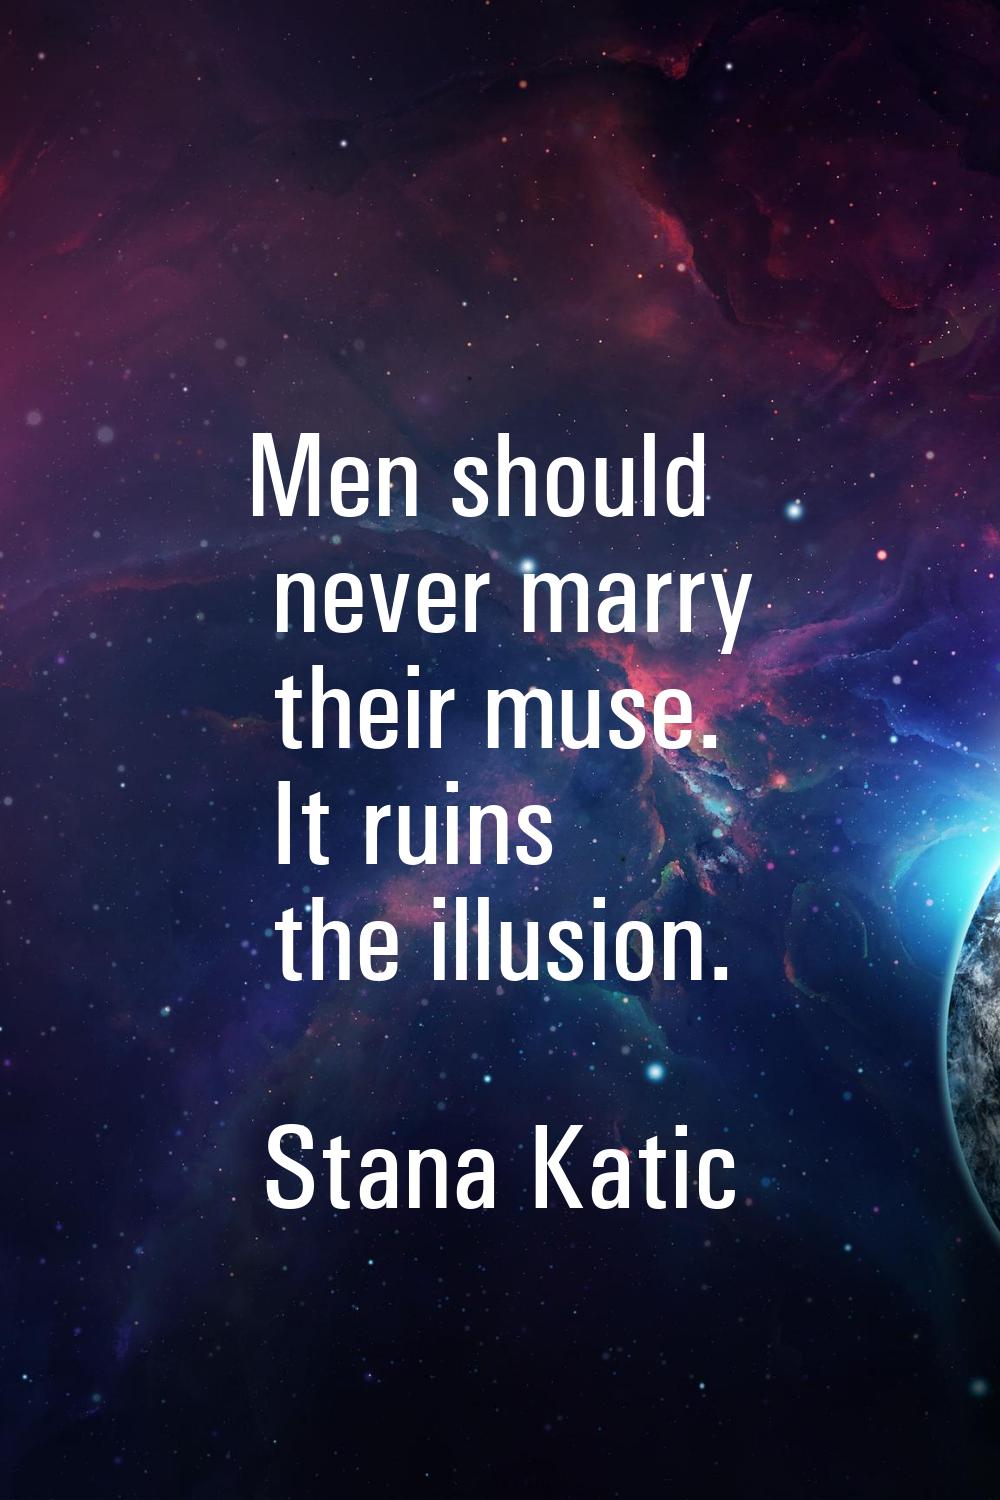 Men should never marry their muse. It ruins the illusion.